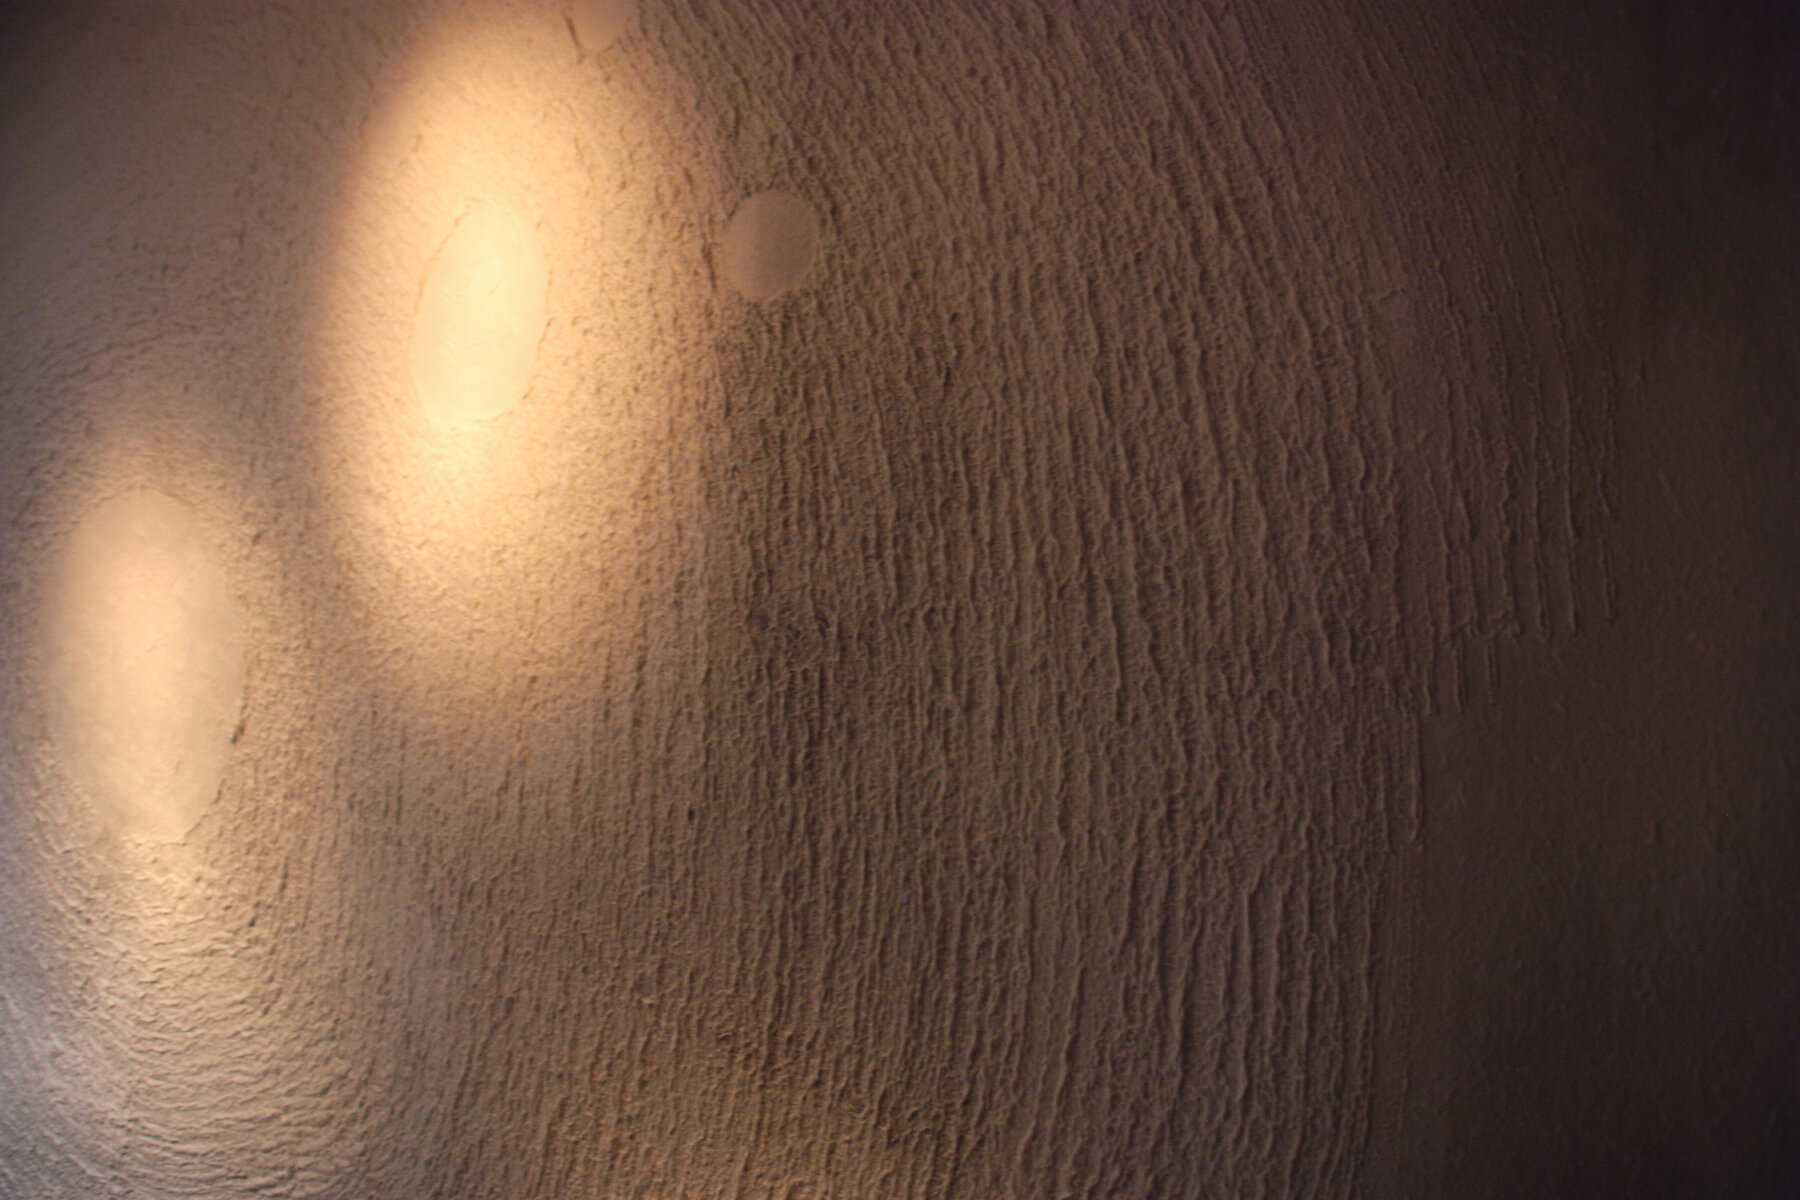    cavern of stars  , 2019 wall section detail  handmade paper (kozo), LED  Gallery Yugen, Kyoto, Japan (renovated storehouse) 